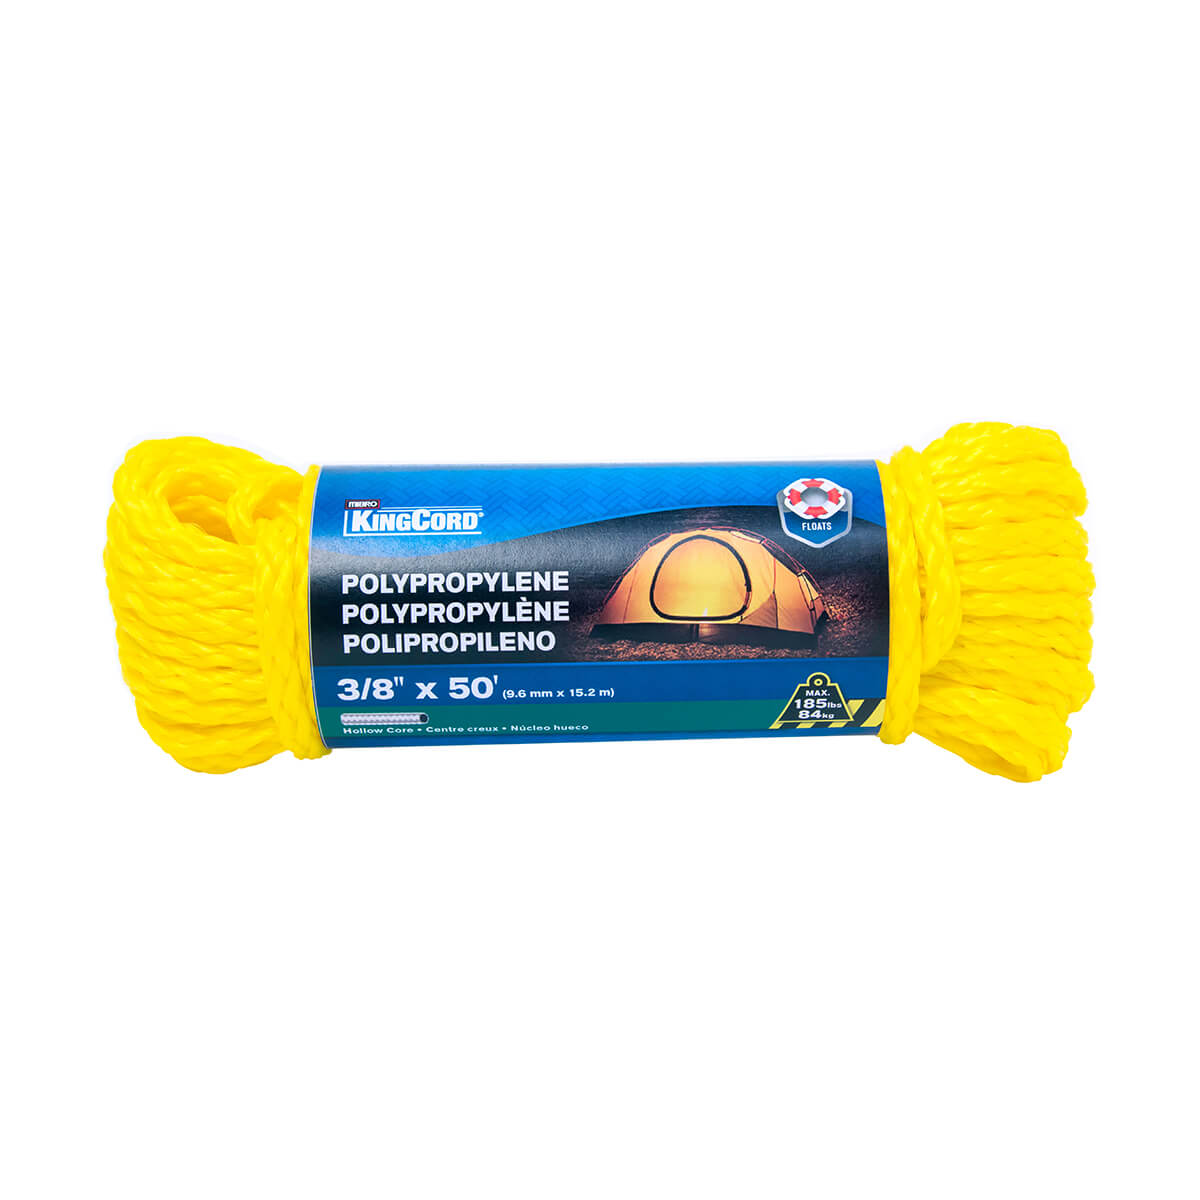 Polypropylene Hollow Core Rope - Yellow - 3/8-in x 50-ft